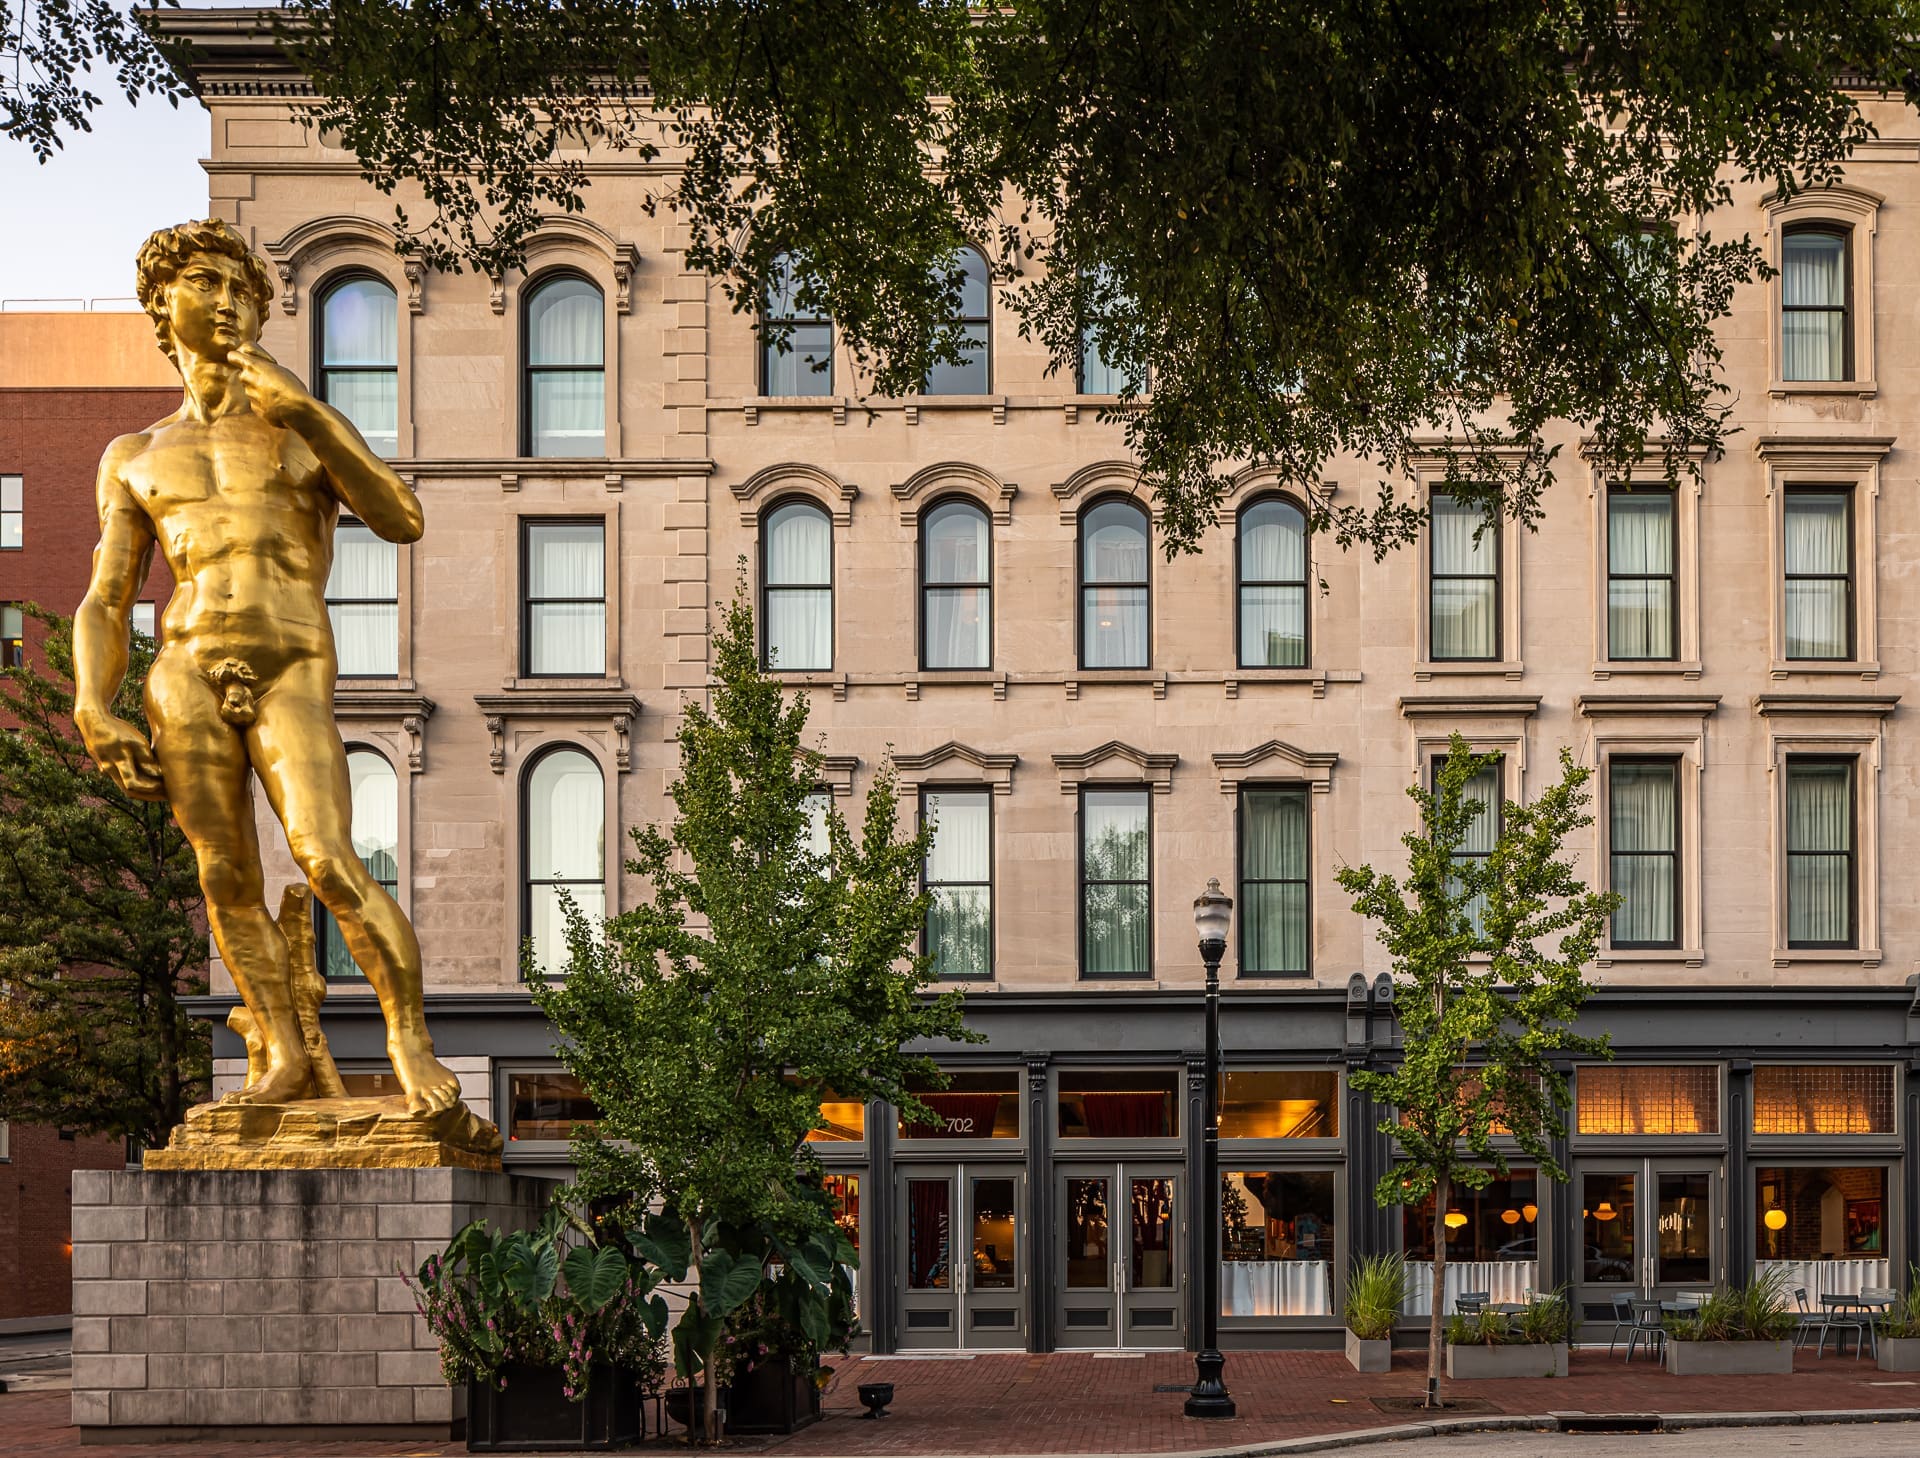 21c Hotel in Louisville, Kentucky. Museum Hotel Statue of David Exterior Architectural Photograph.